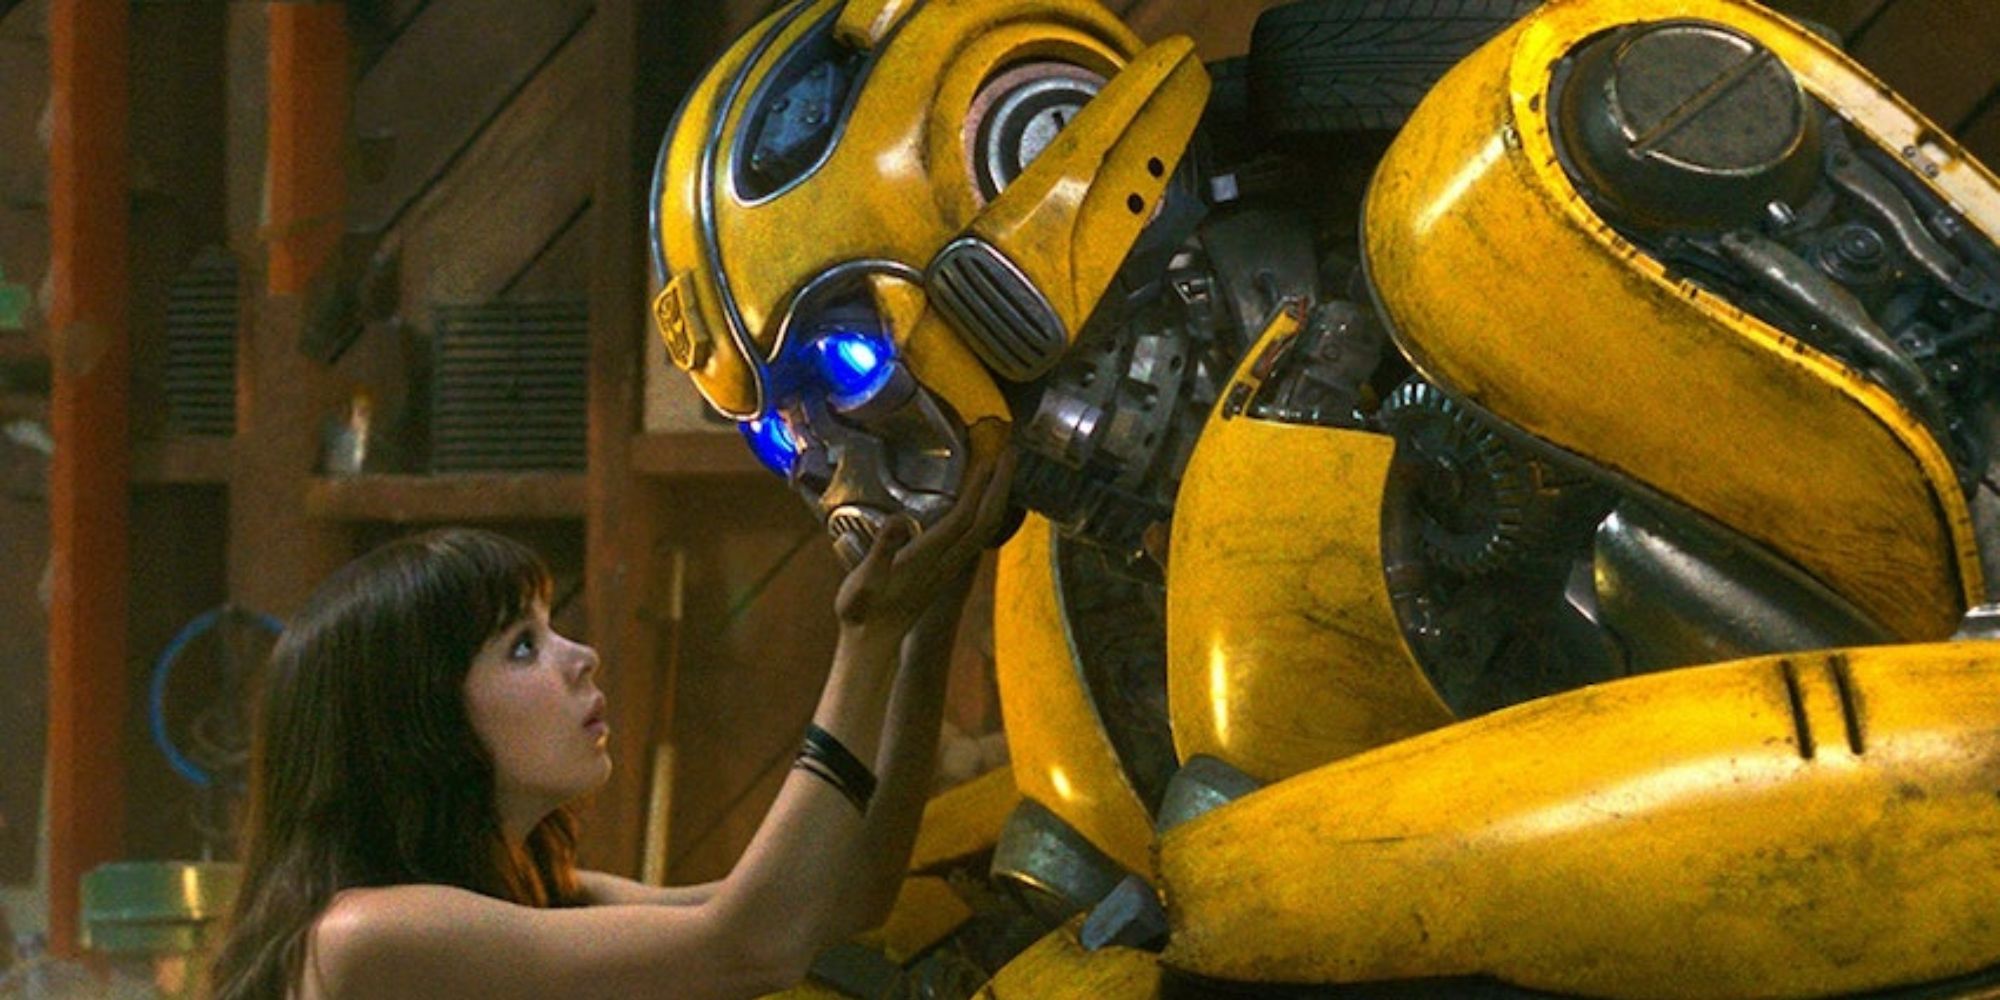 Charlie takes care of Bumblebee.